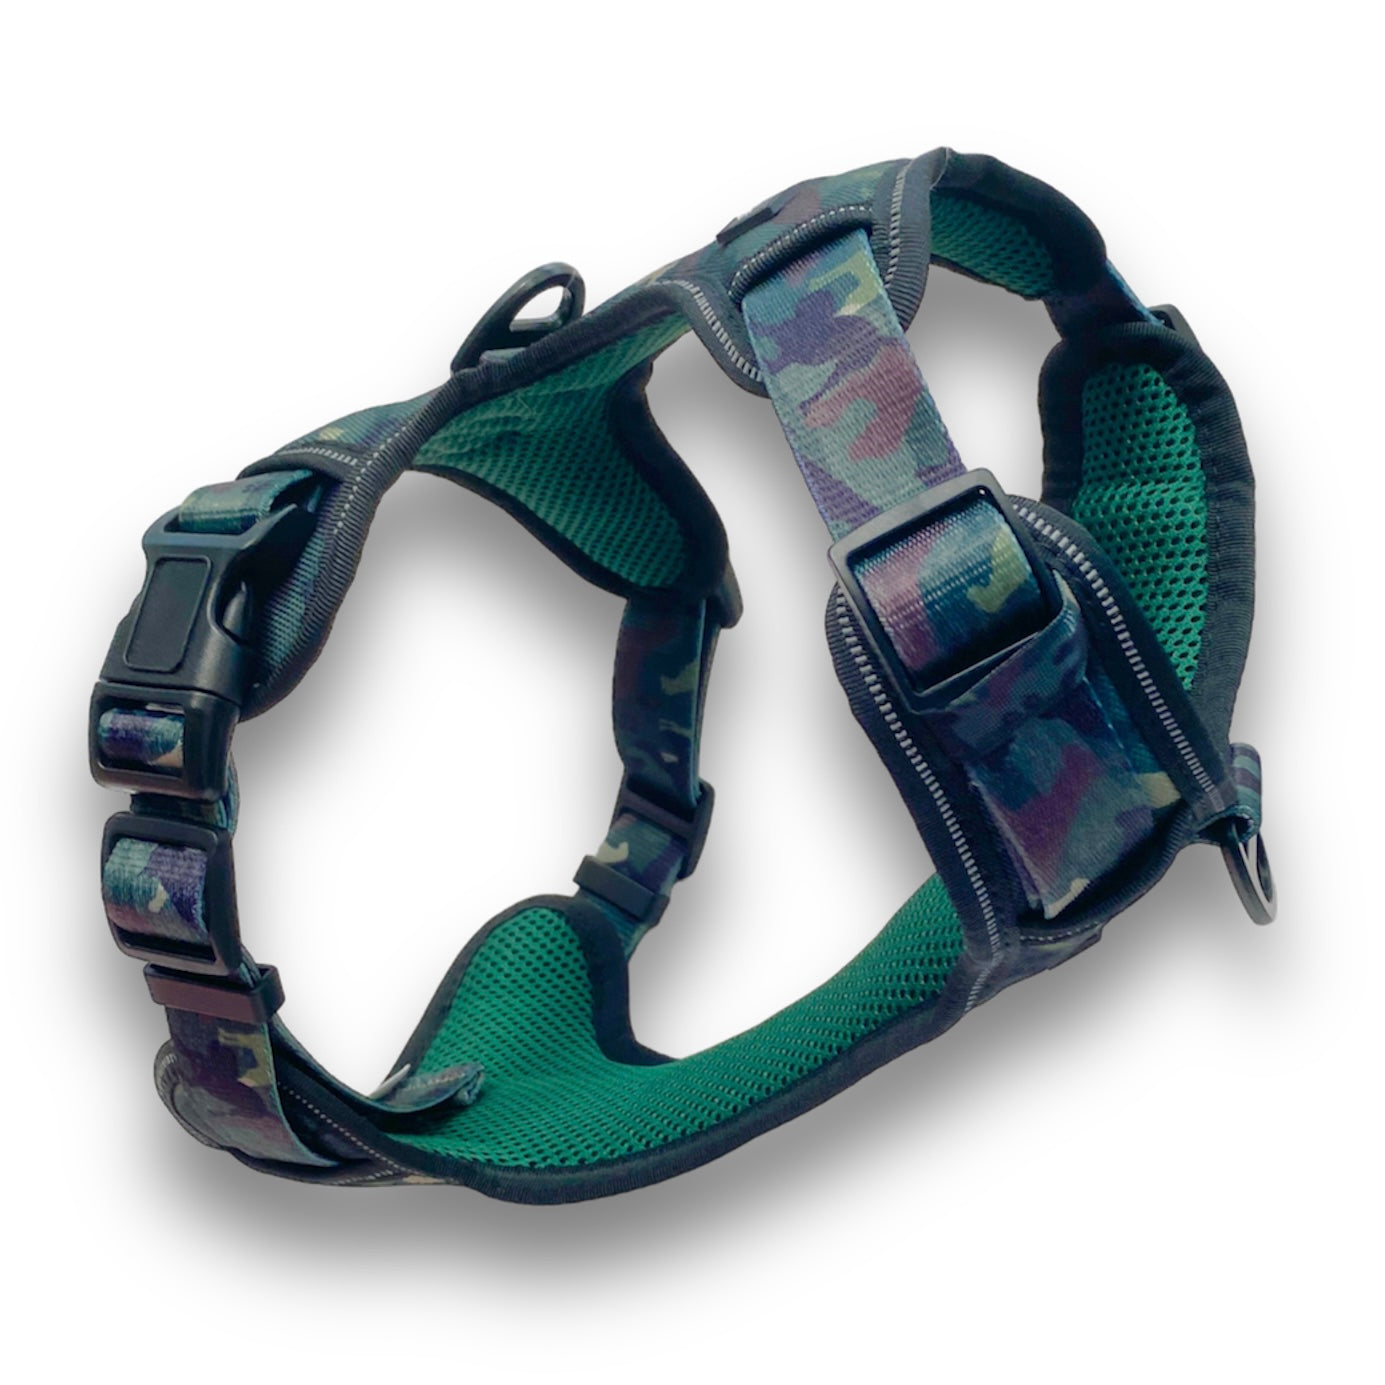 a 3d photo of a green camouflage heavy duty dog harness by fearless pet